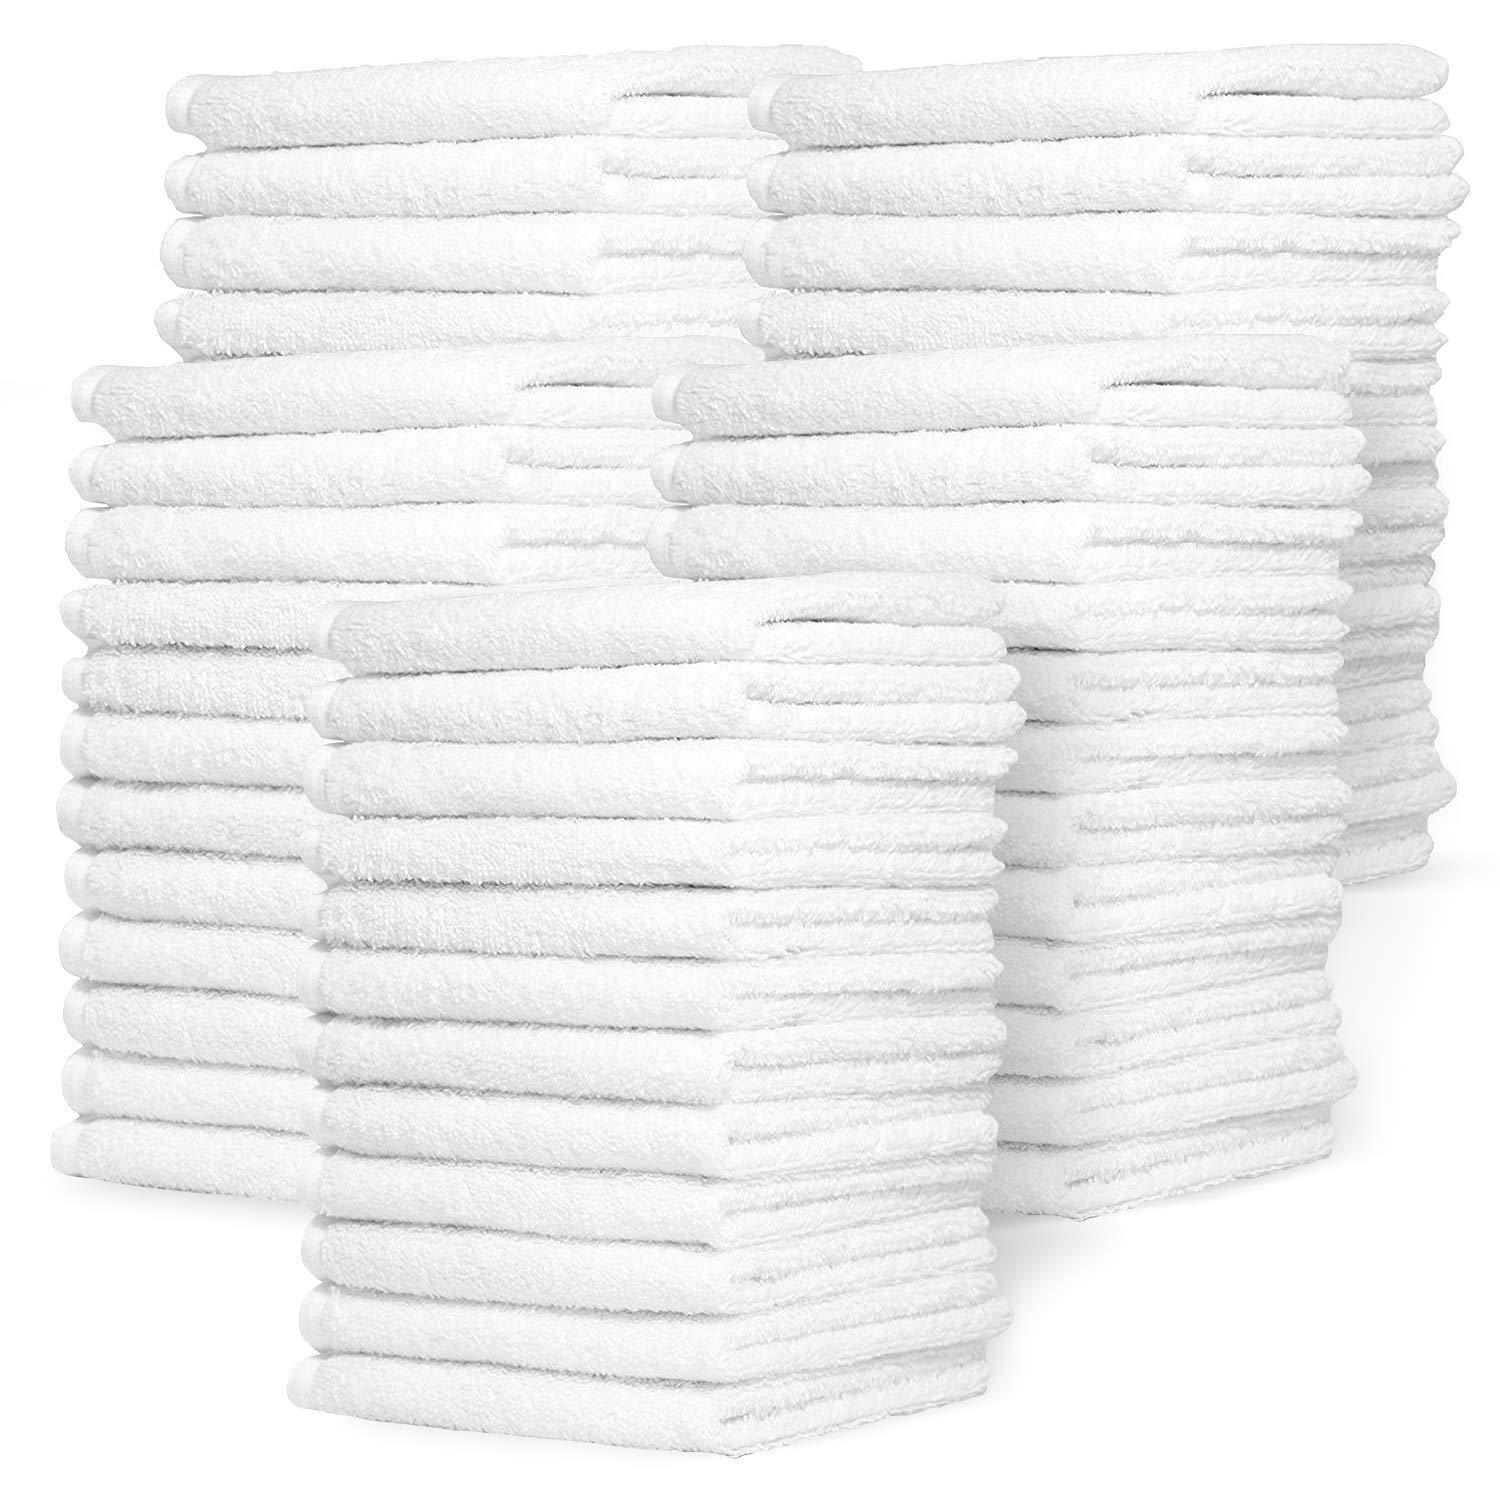 Washcloths 24 Pack 100% Cotton 12 x 12 Inches (White) Durable, Lightweight,  Bath Rags, Wash Rag, Commercial Grade and Ultra Absorbent Cleaning Towels